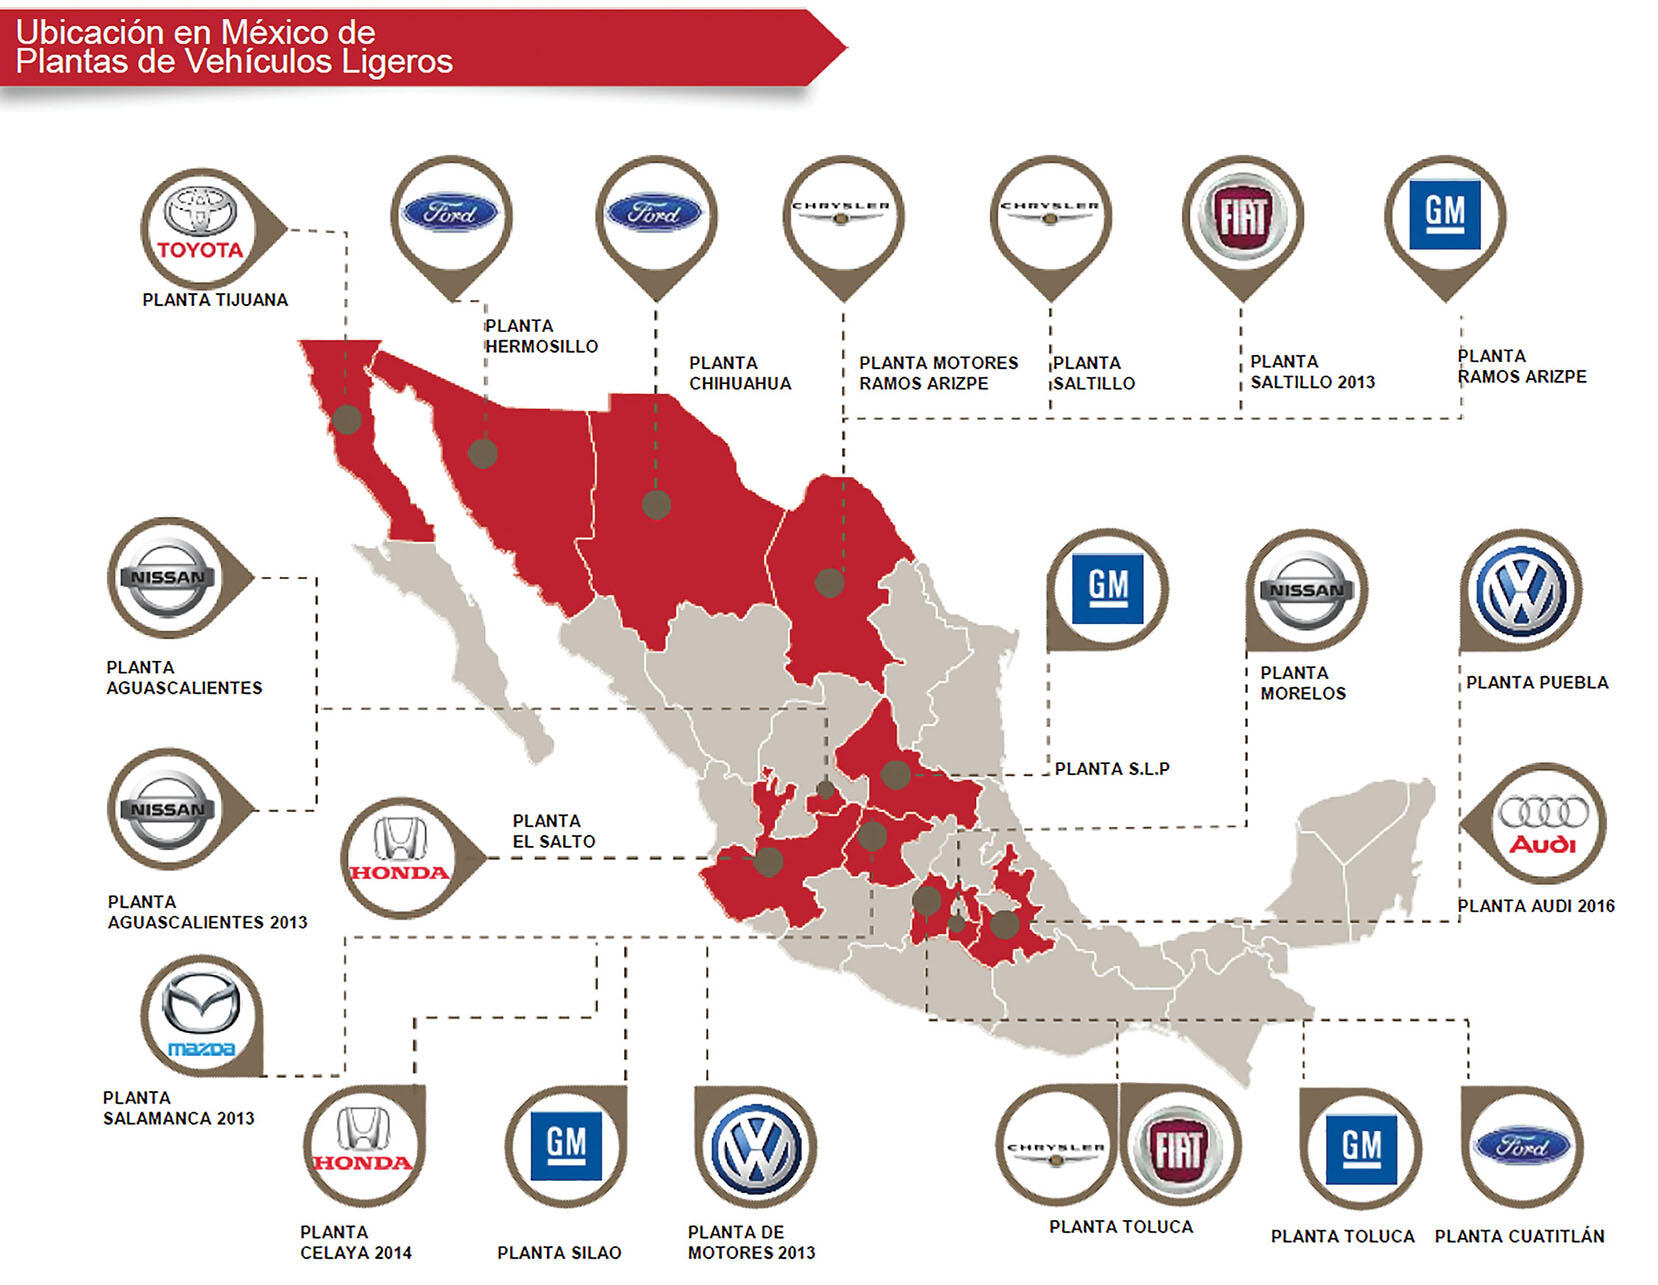 A map with logos of various manufacturers shows some of the auto production facilities in Mexico. (Image from ProMéxico/Gobierno de México.)